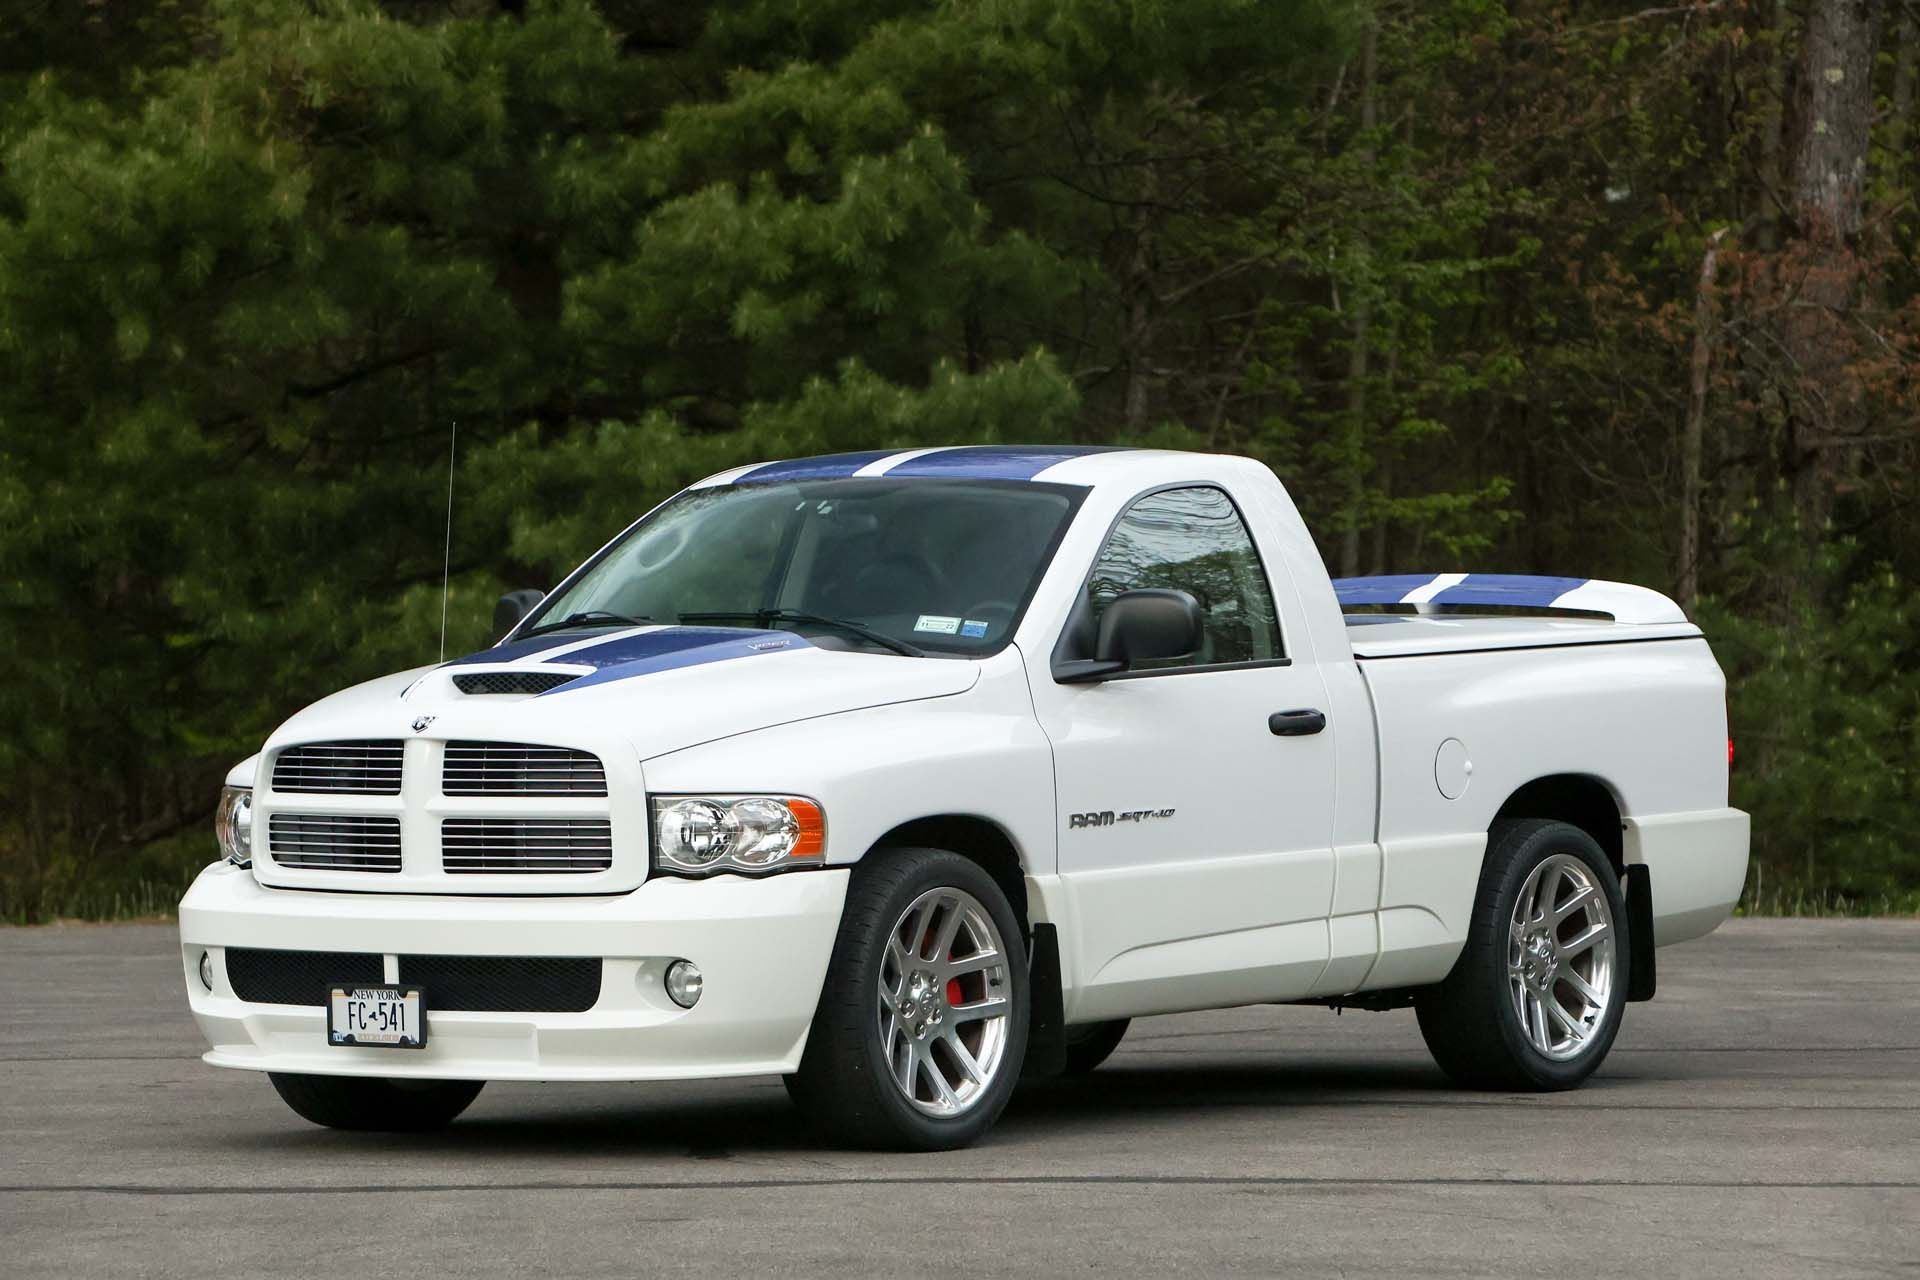 Gensidig rolige barm 2005 Dodge RAM SRT/10 Commemorative Edition Pickup | Passion for the Drive:  The Cars of Jim Taylor | Collector Car Auctions | Broad Arrow Auctions